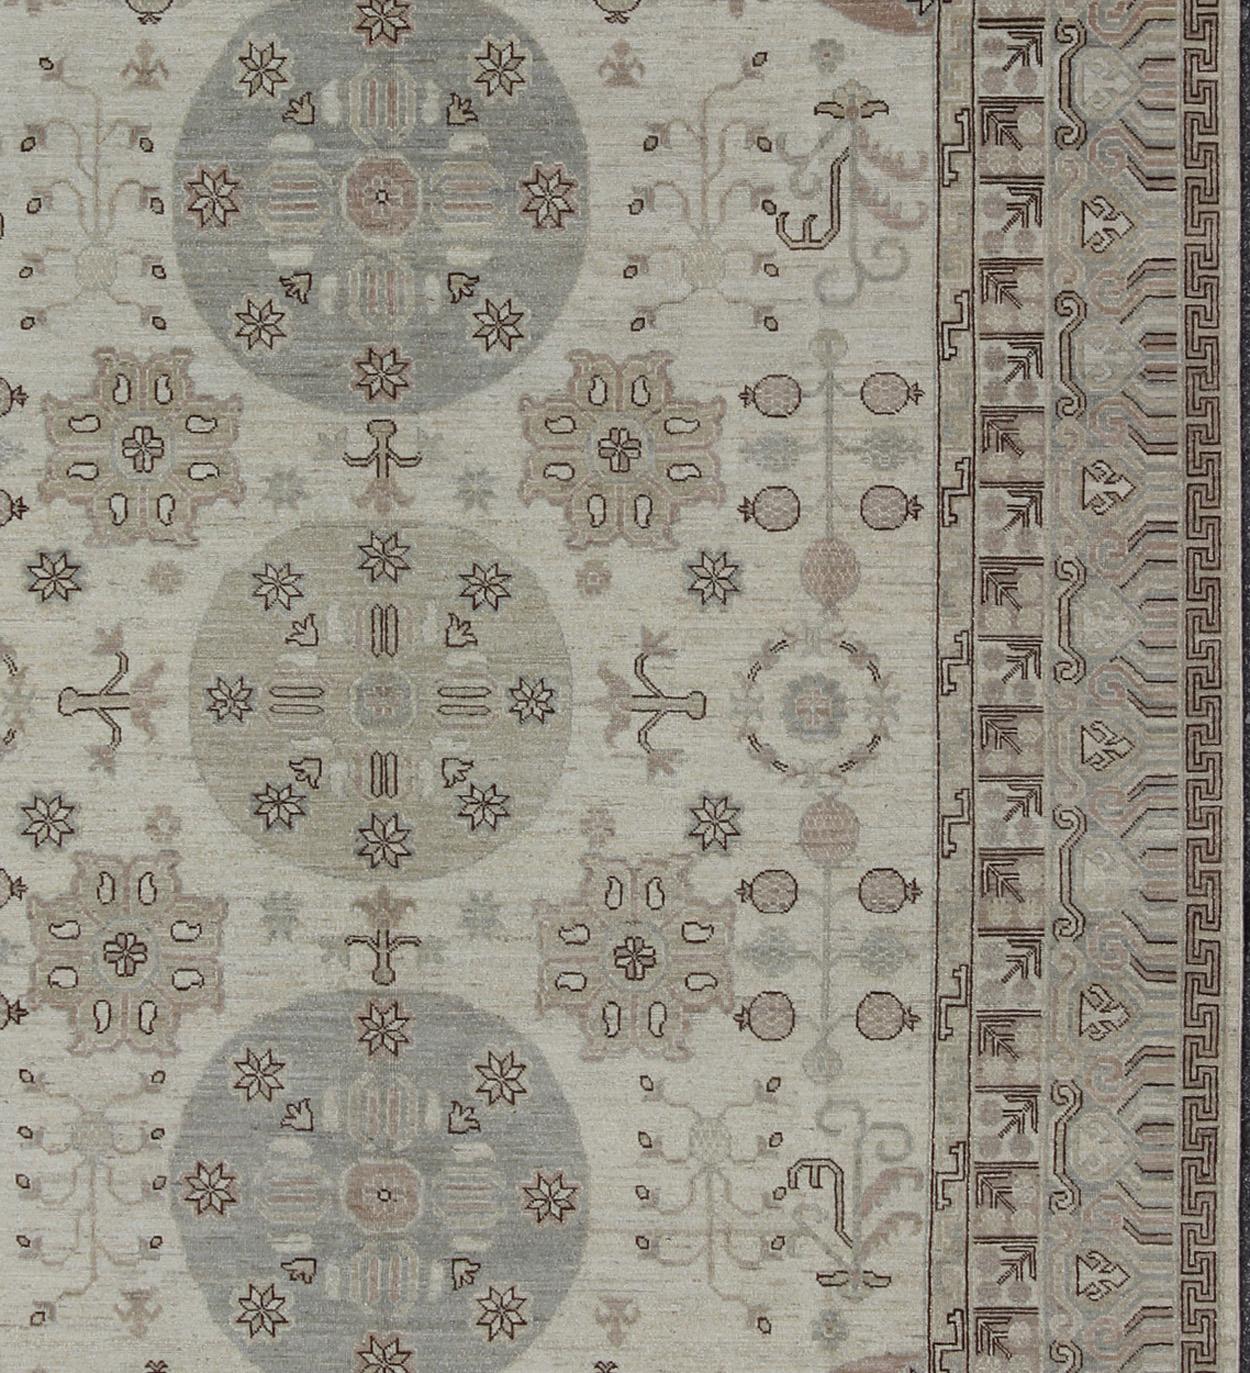 Measures: 9'1 x 12'4.
Light color Khotan rug, Afghanistan made fine piece, with circular Medallions in Gray, Tan, Cream, brown and light blue. Khotan Design Rug with Circular Medallions by Keivan Woven Arts / rug/MP-1703-1613 country of origin /